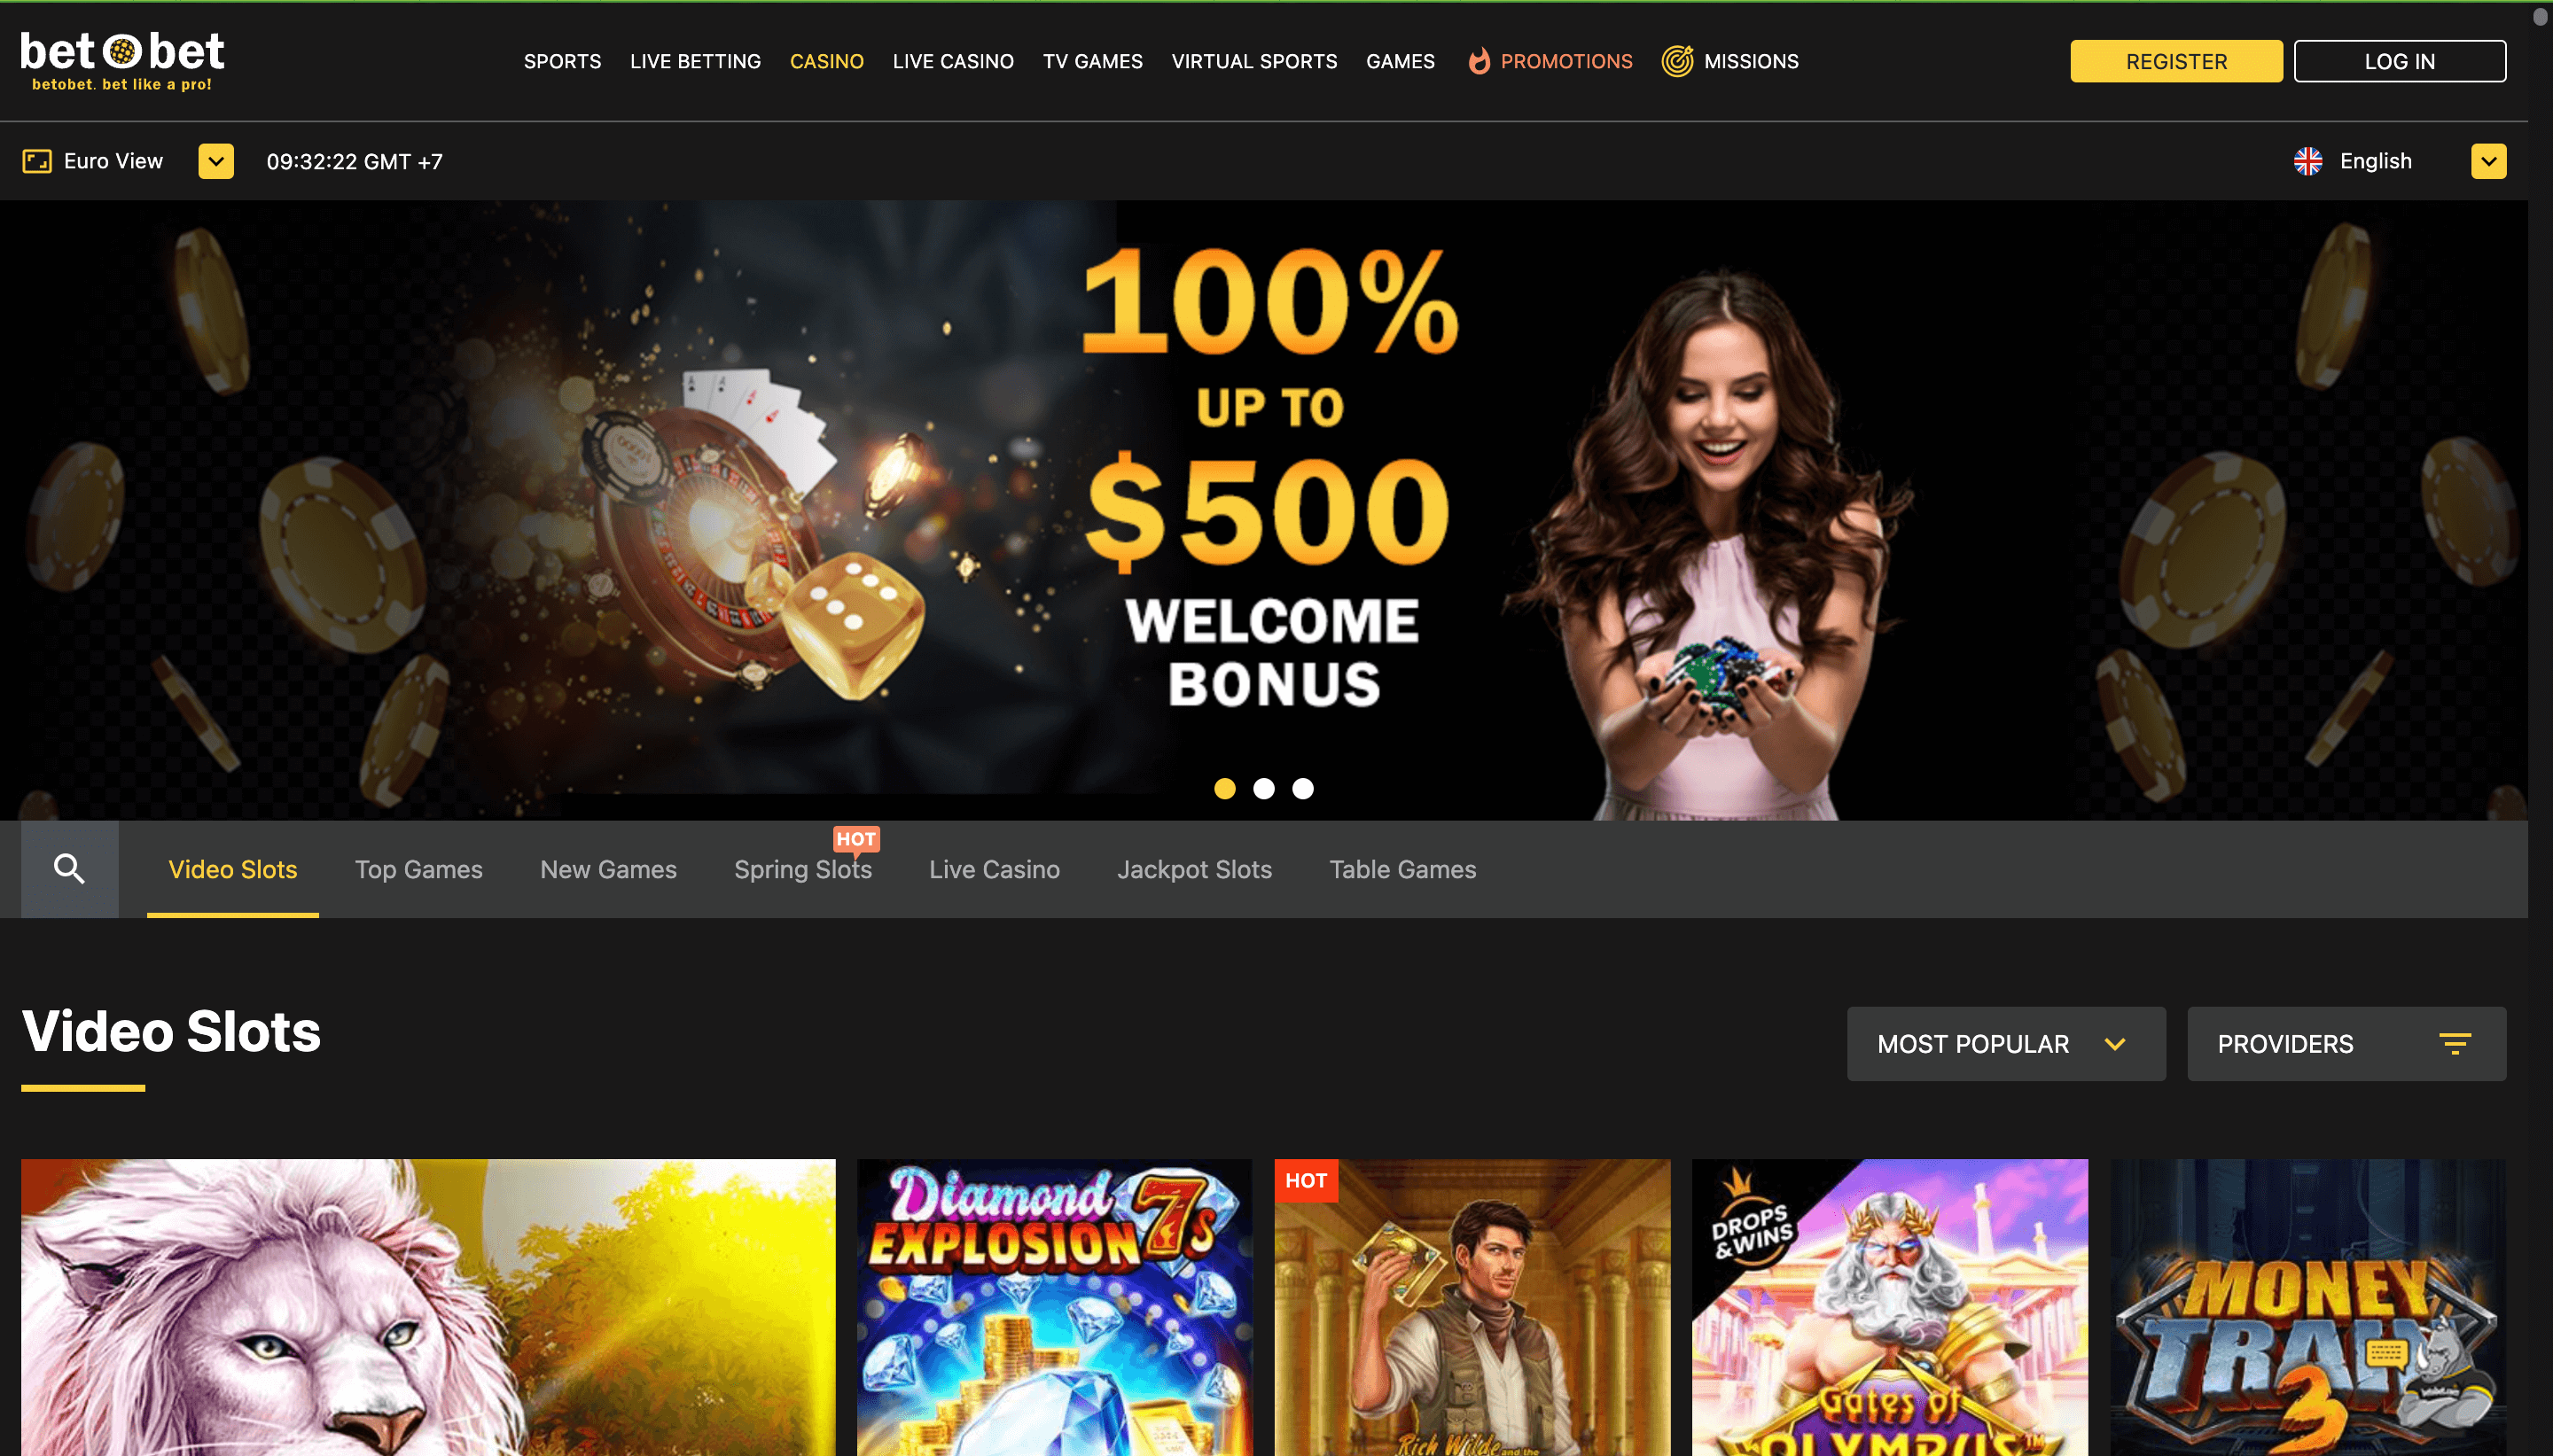 Pay in crypto at BetOBet Casino - Emirates Casino Online Casino Payment Guide  - Emirates Casino Online Casino Payment Guide - UAE Casinos - UAE Crypto Casinos - UAE Crypto Casino Payment Methods